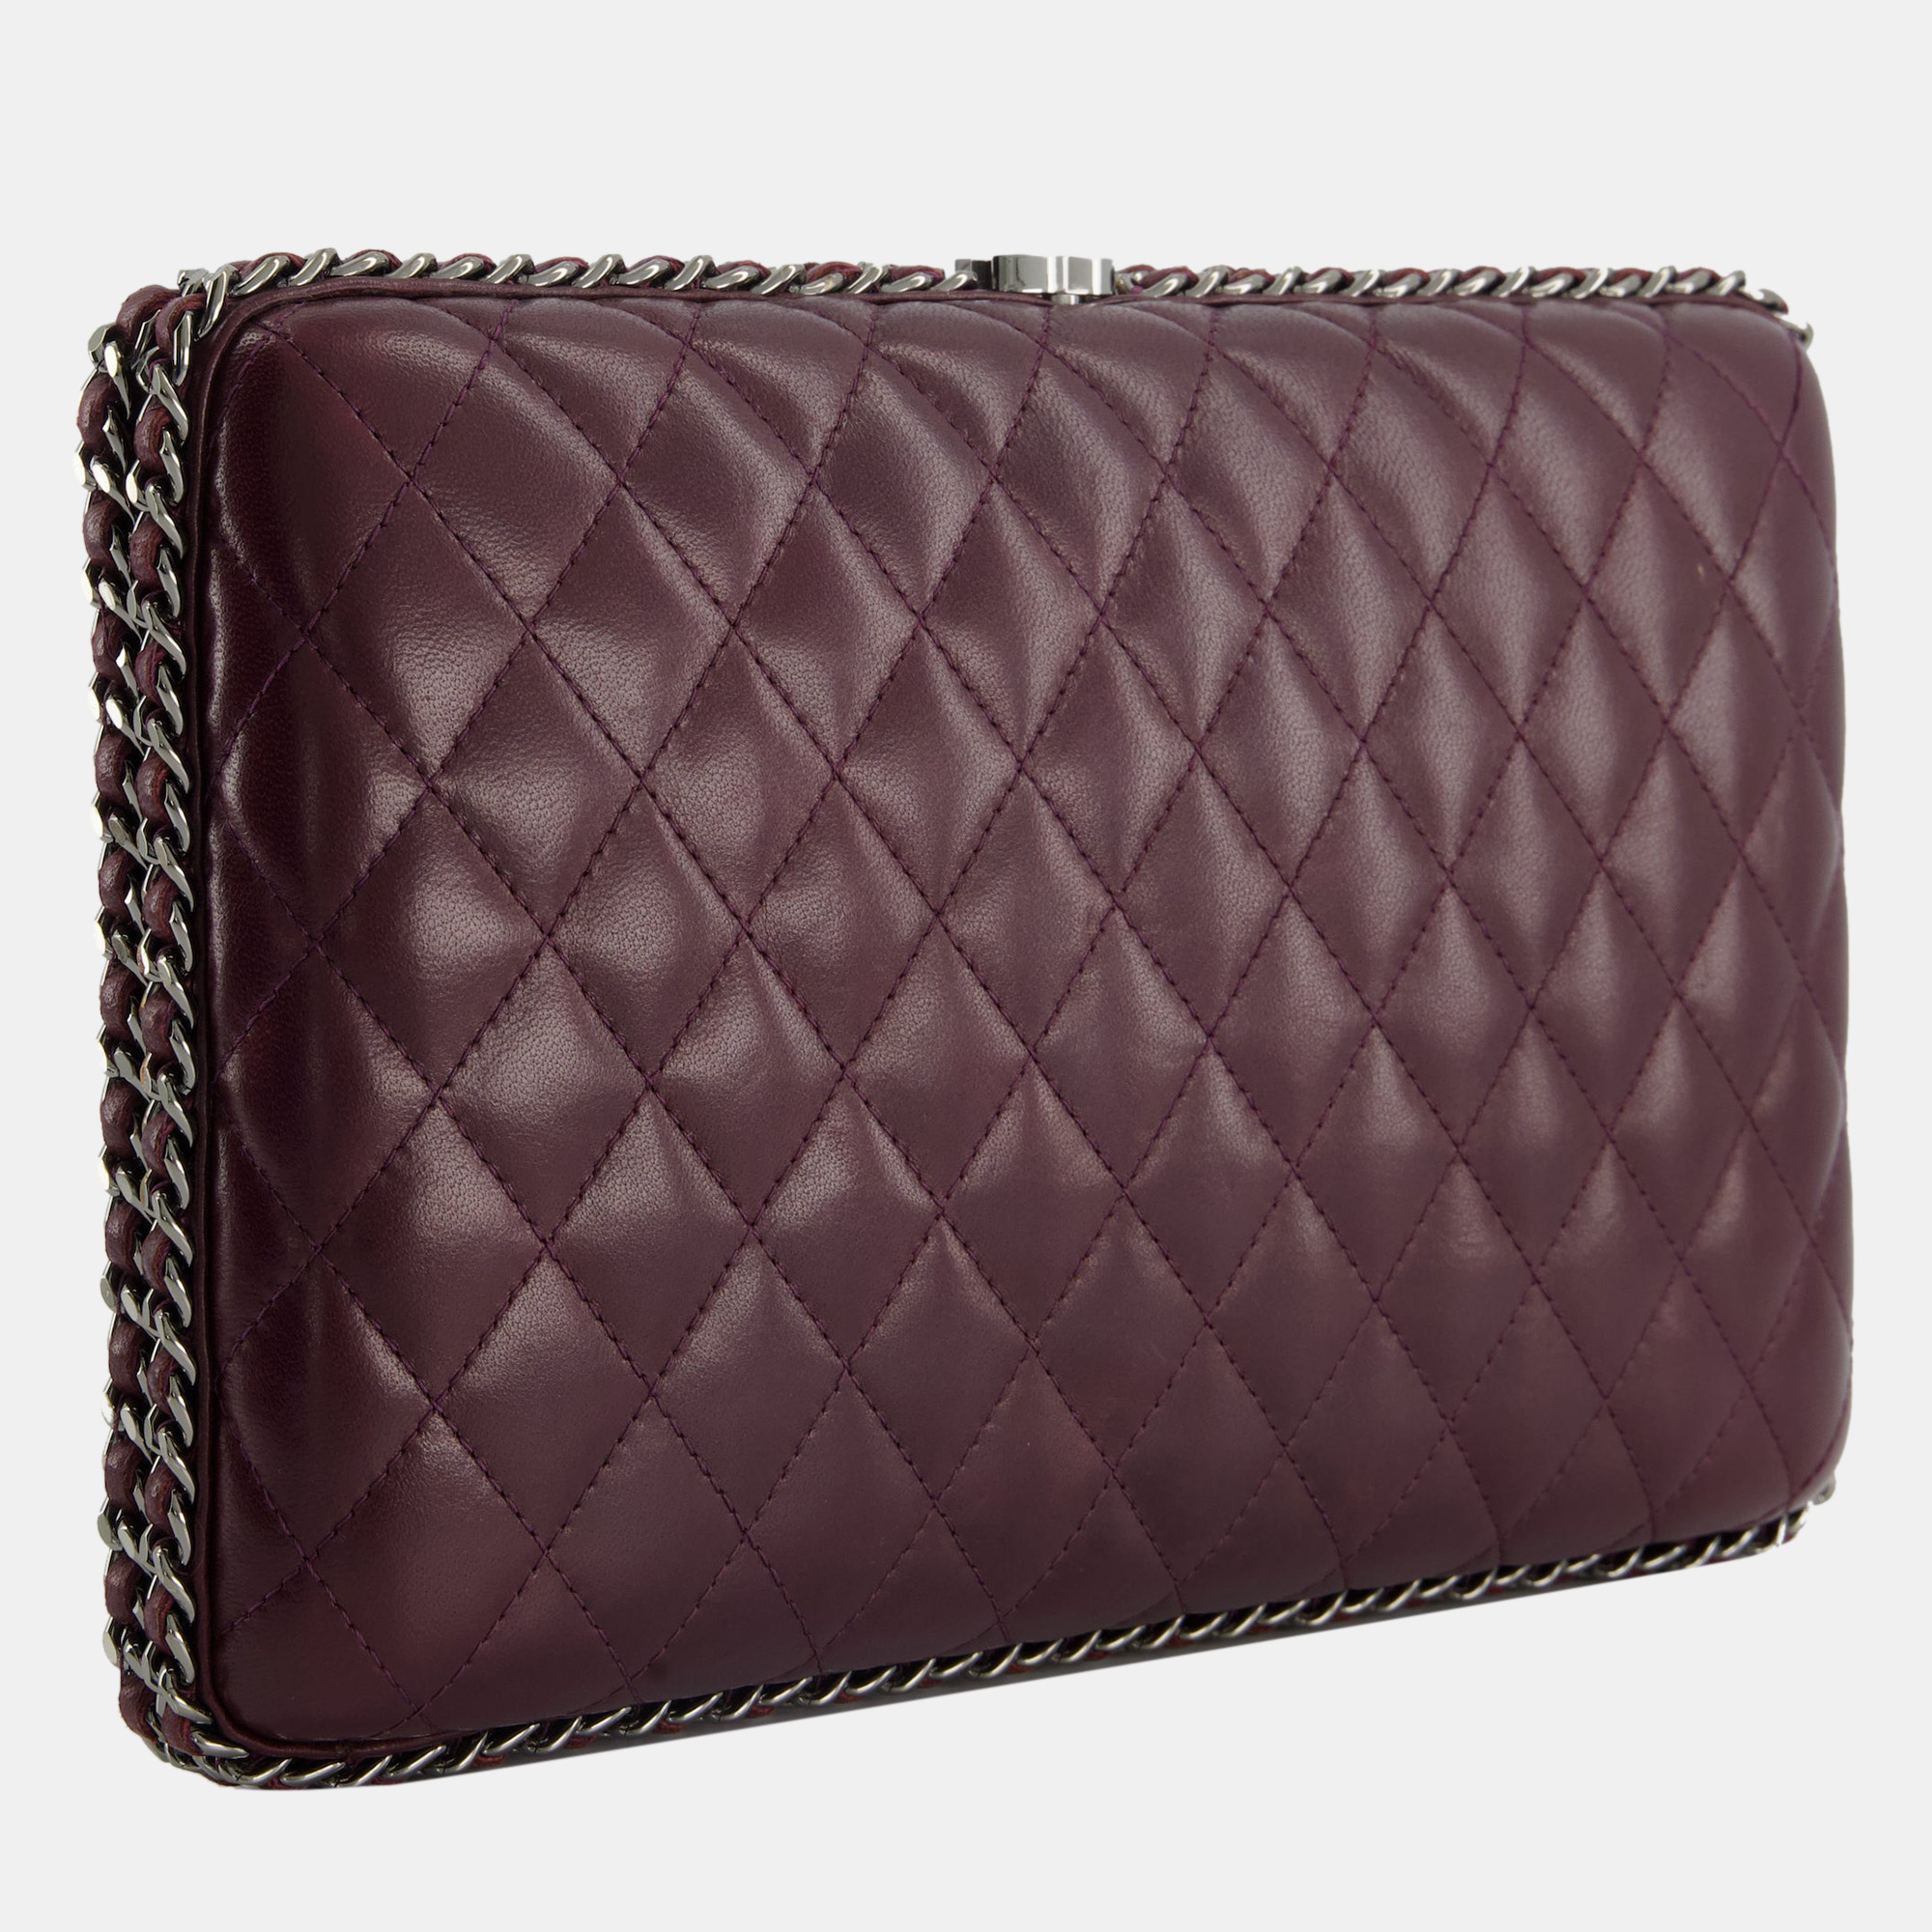 Chanel Burgundy Clutch On Chain Bag With Chain Details And Gunmetal Hardware